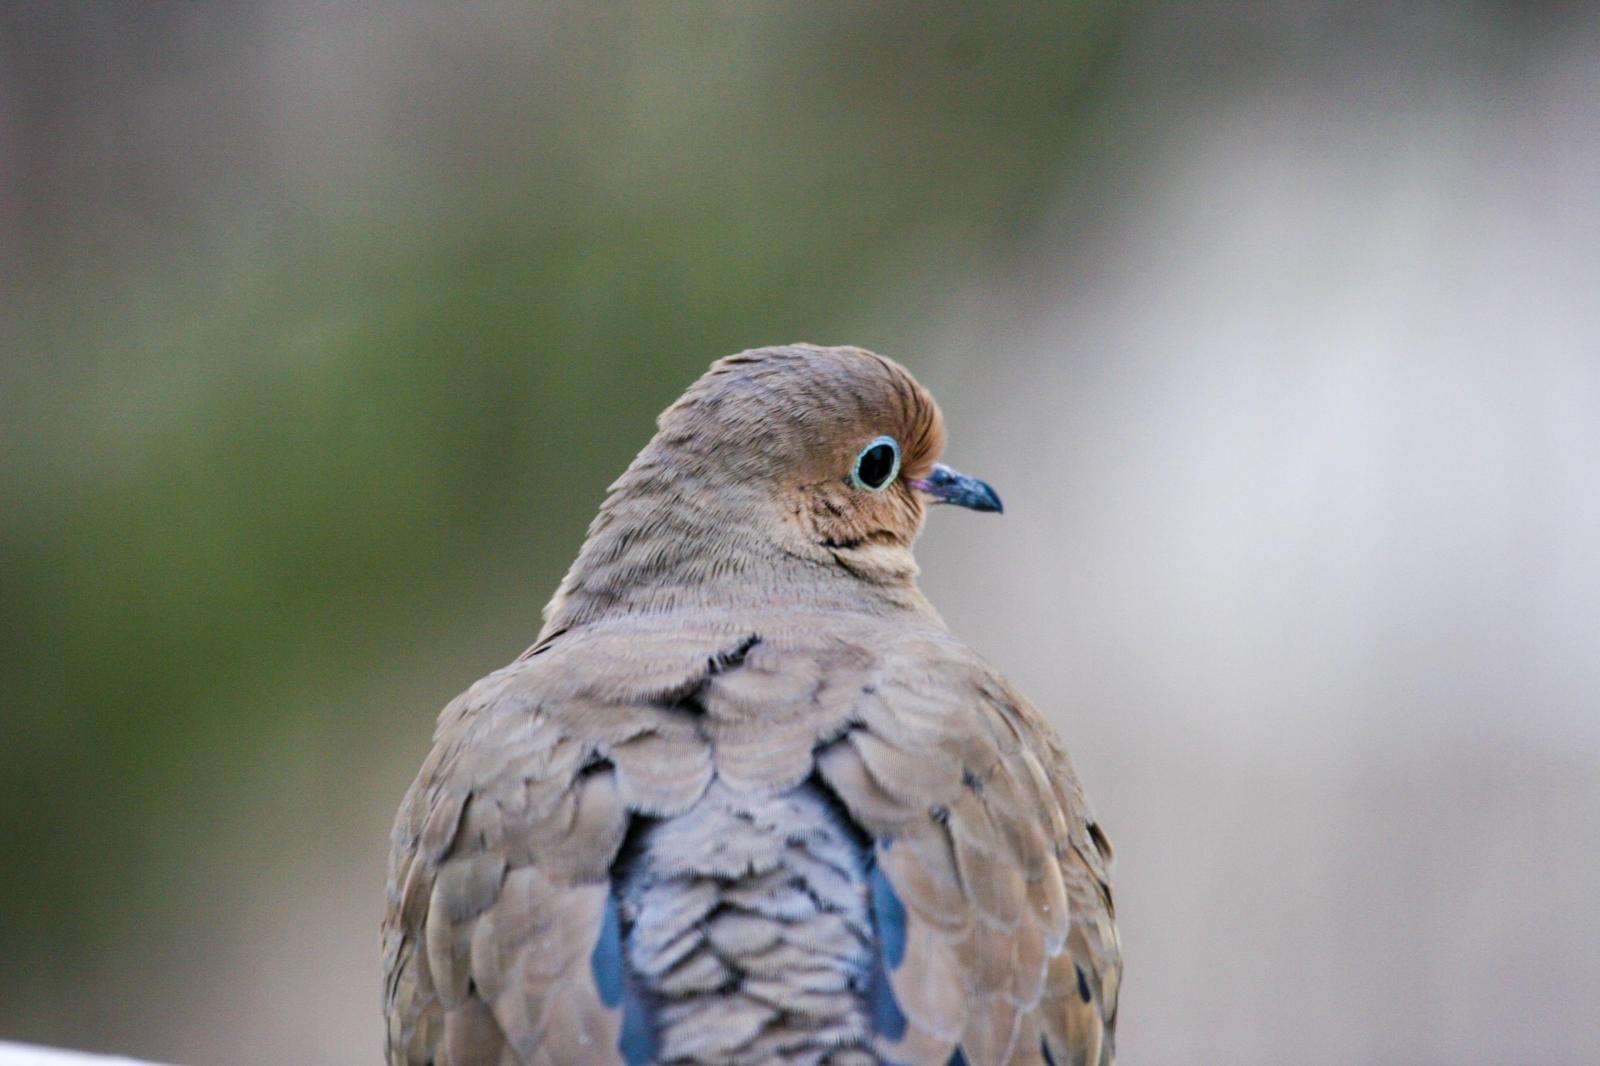 Mourning Dove Photo by Roseanne CALECA